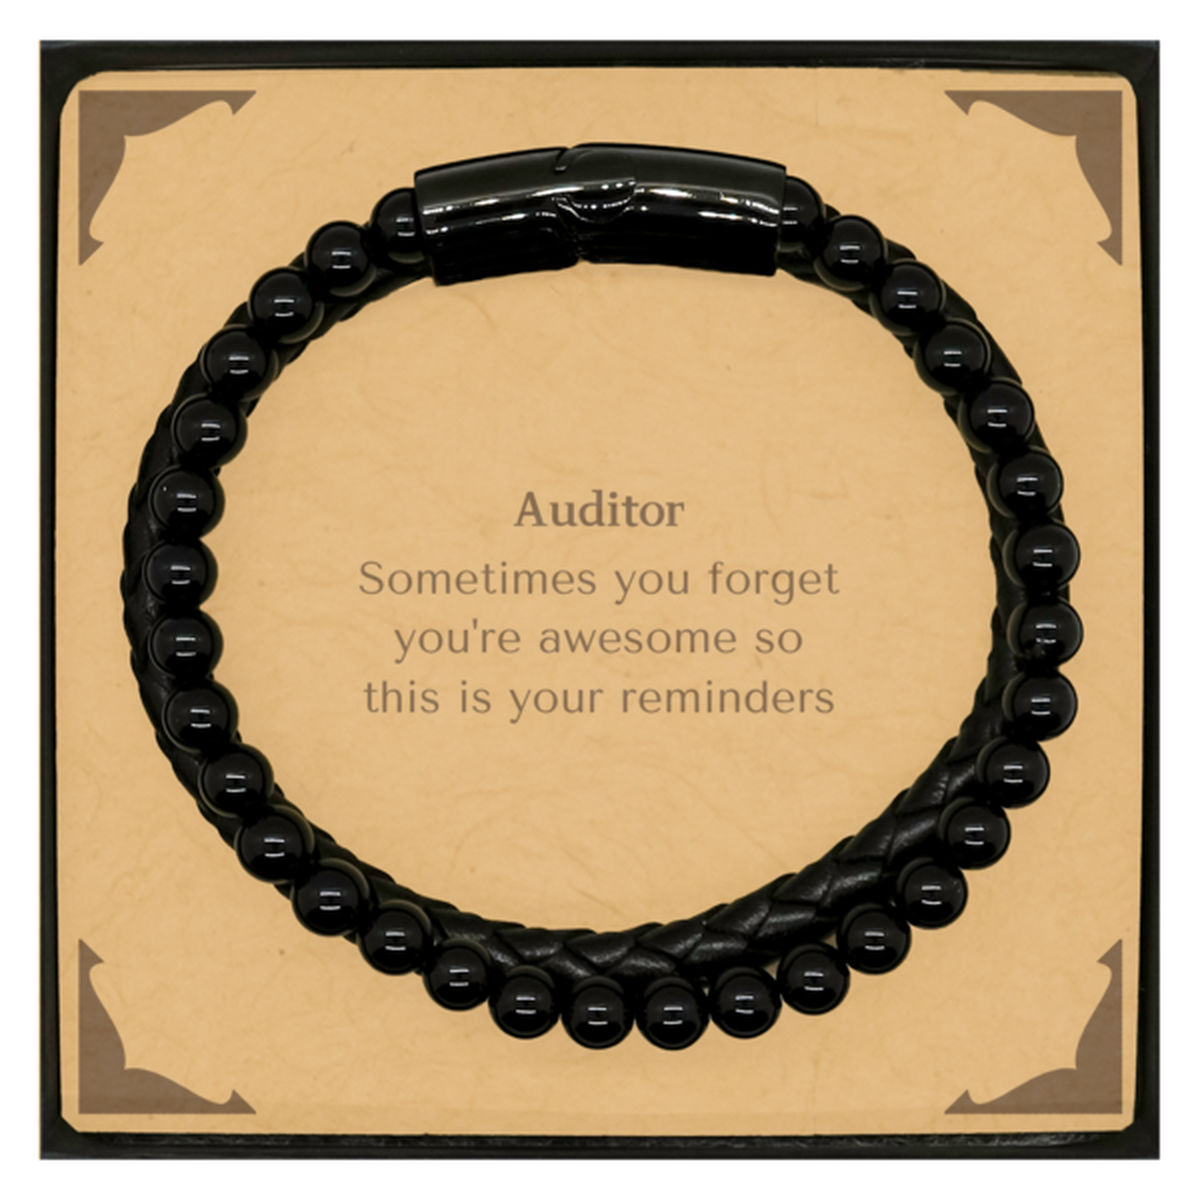 Sentimental Auditor Stone Leather Bracelets, Auditor Sometimes you forget you're awesome so this is your reminders, Graduation Christmas Birthday Gifts for Auditor, Men, Women, Coworkers